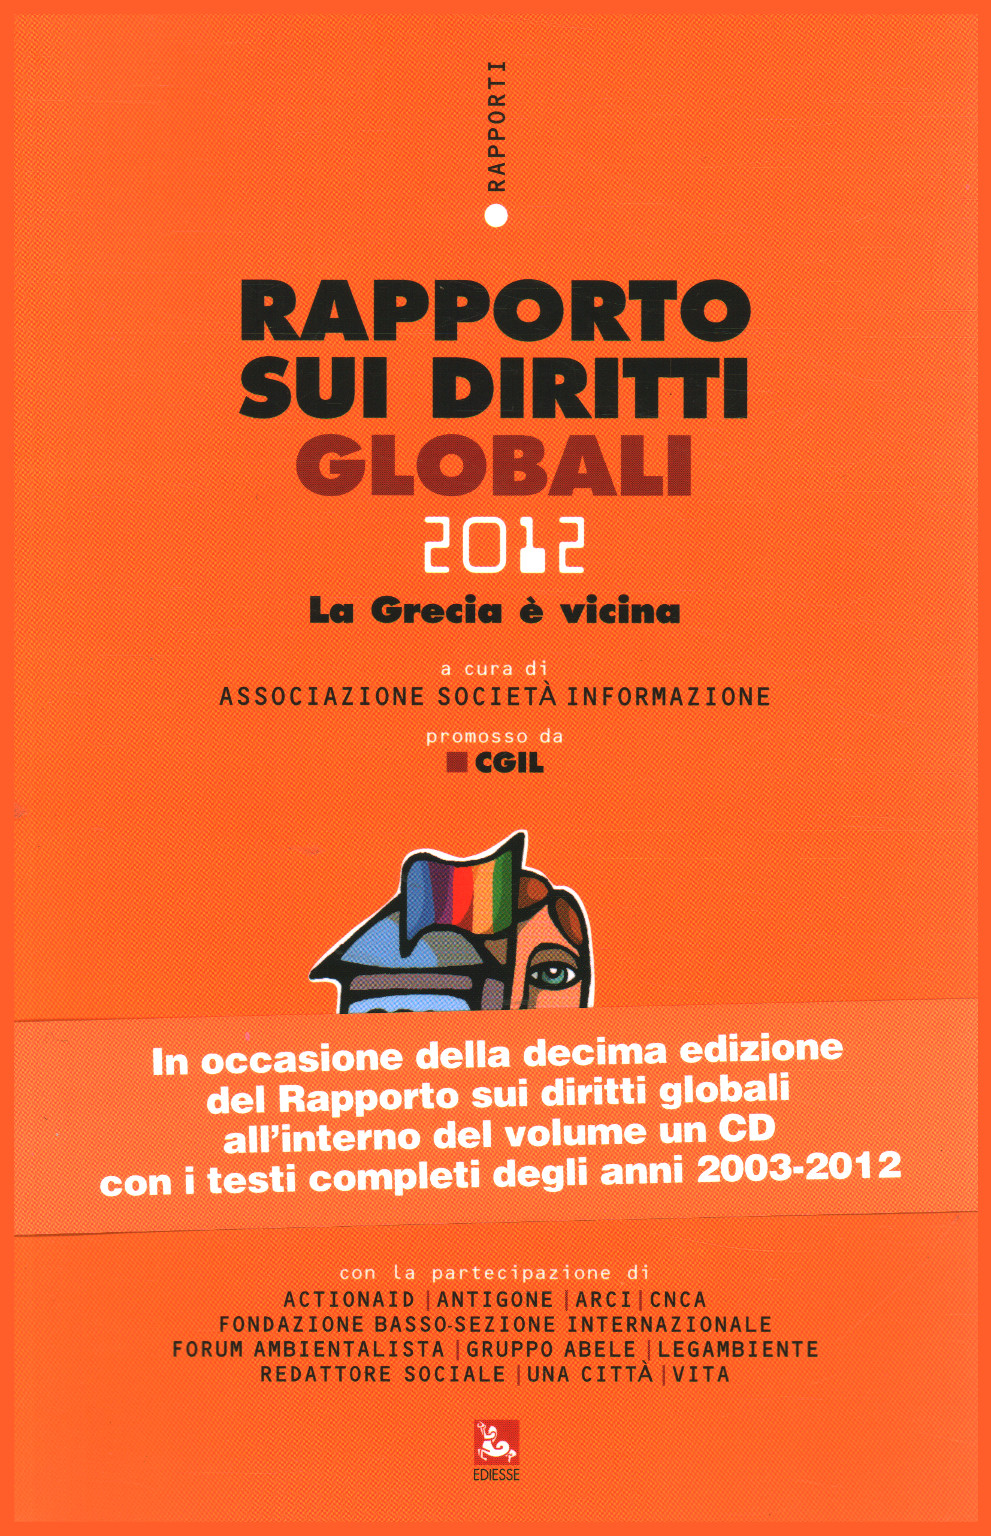 Rights report 2012 global Association Company Information.